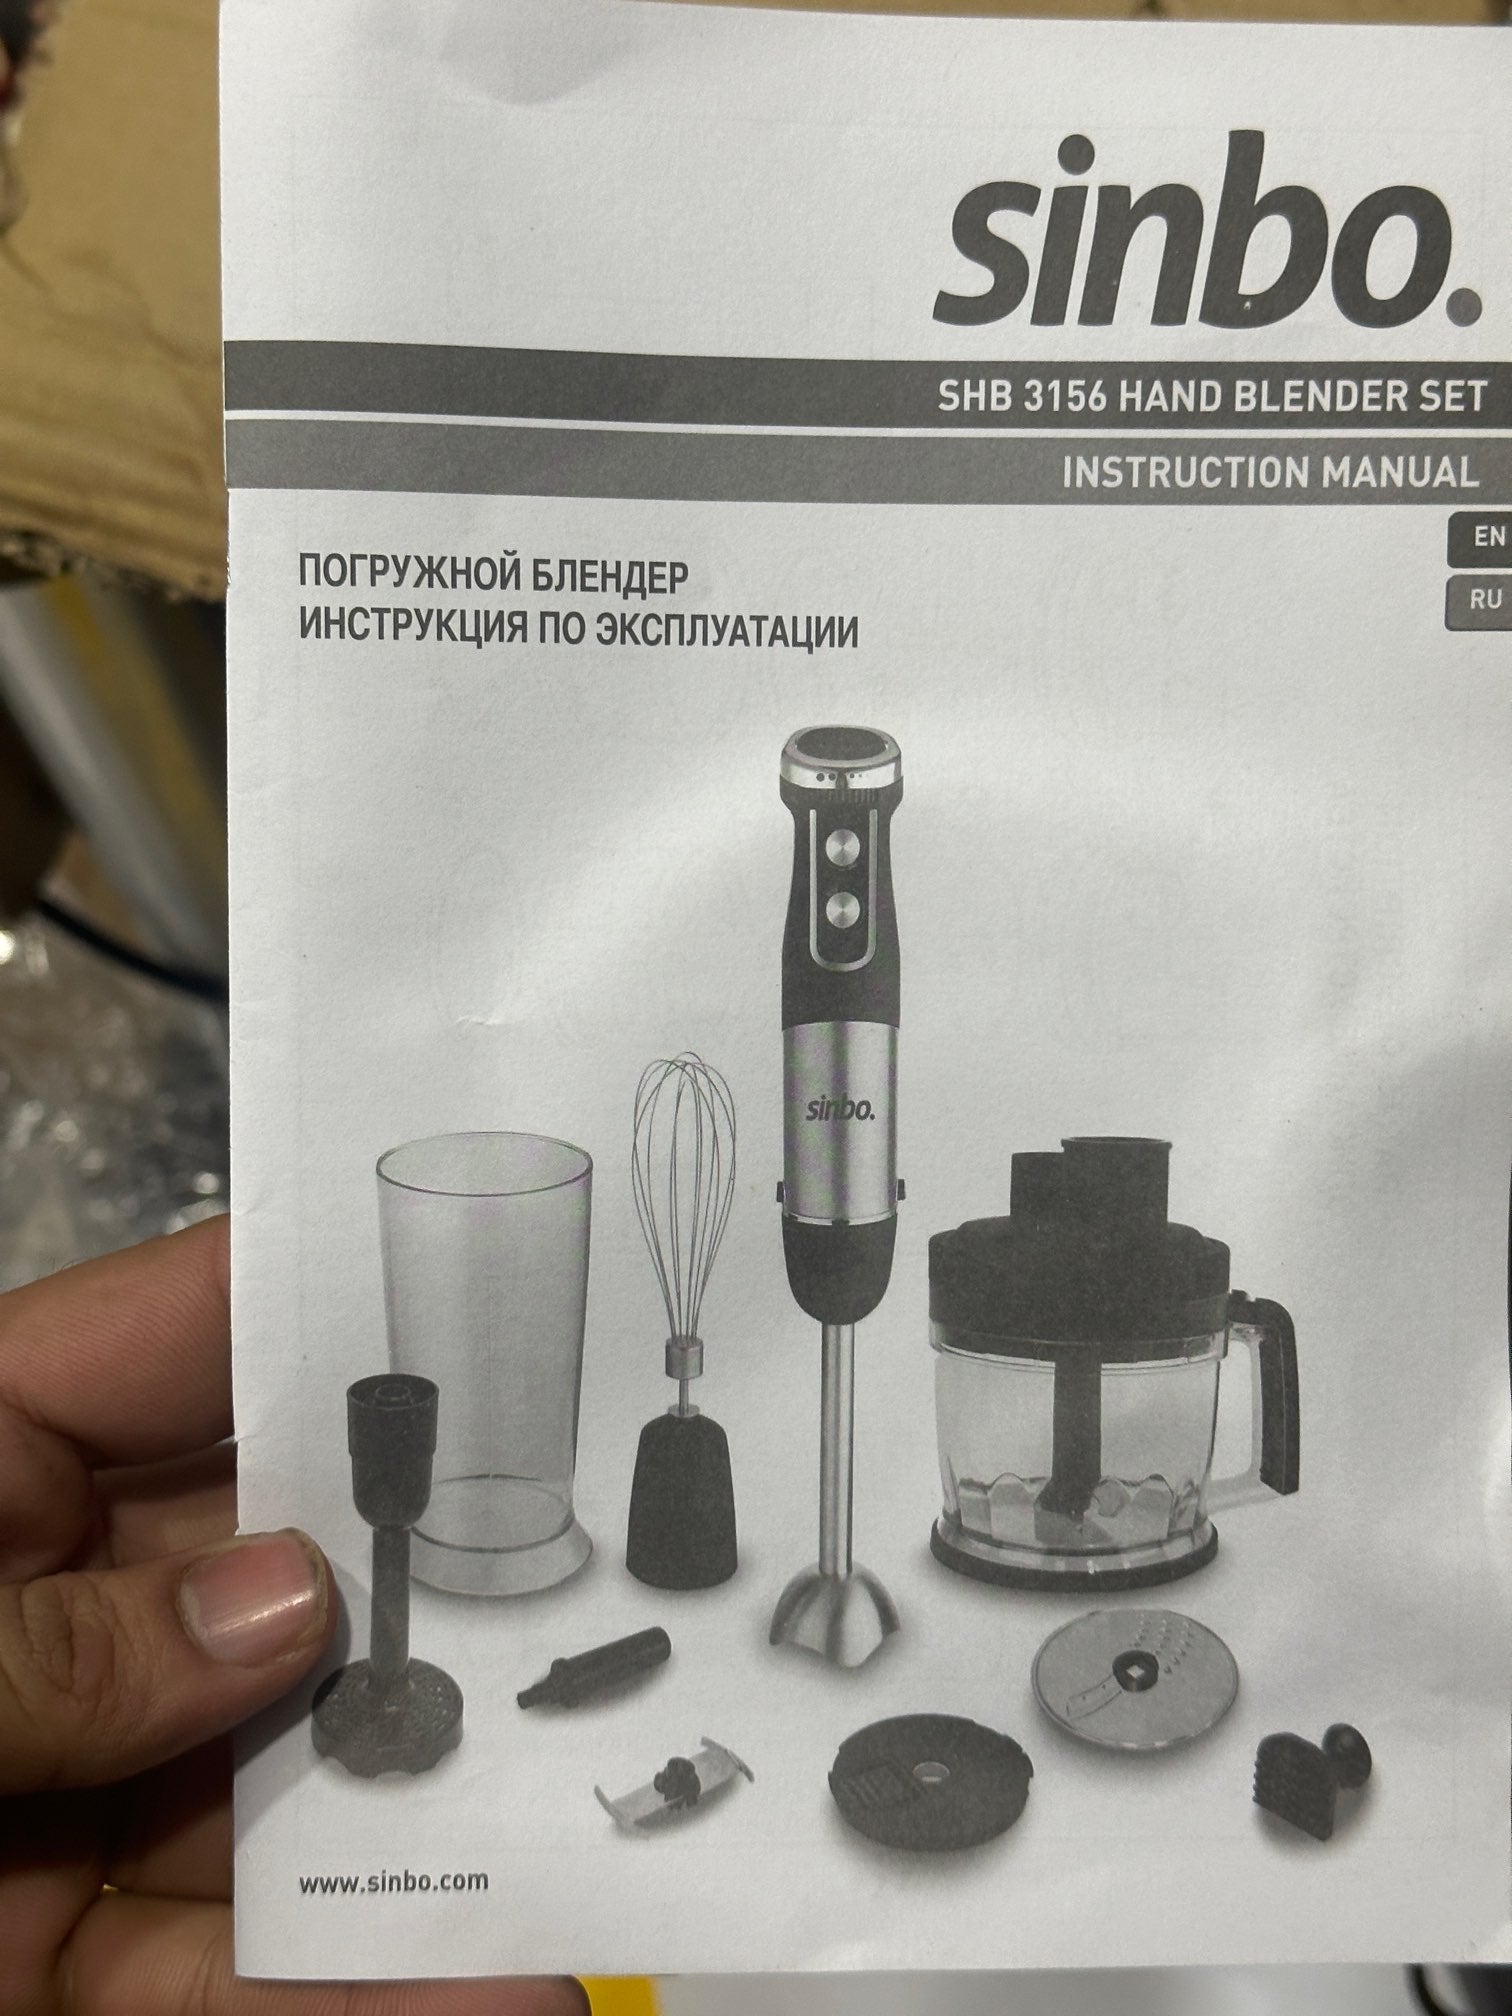 Russia lot imported 8 in 1 hand blender set with 2 litre chopper